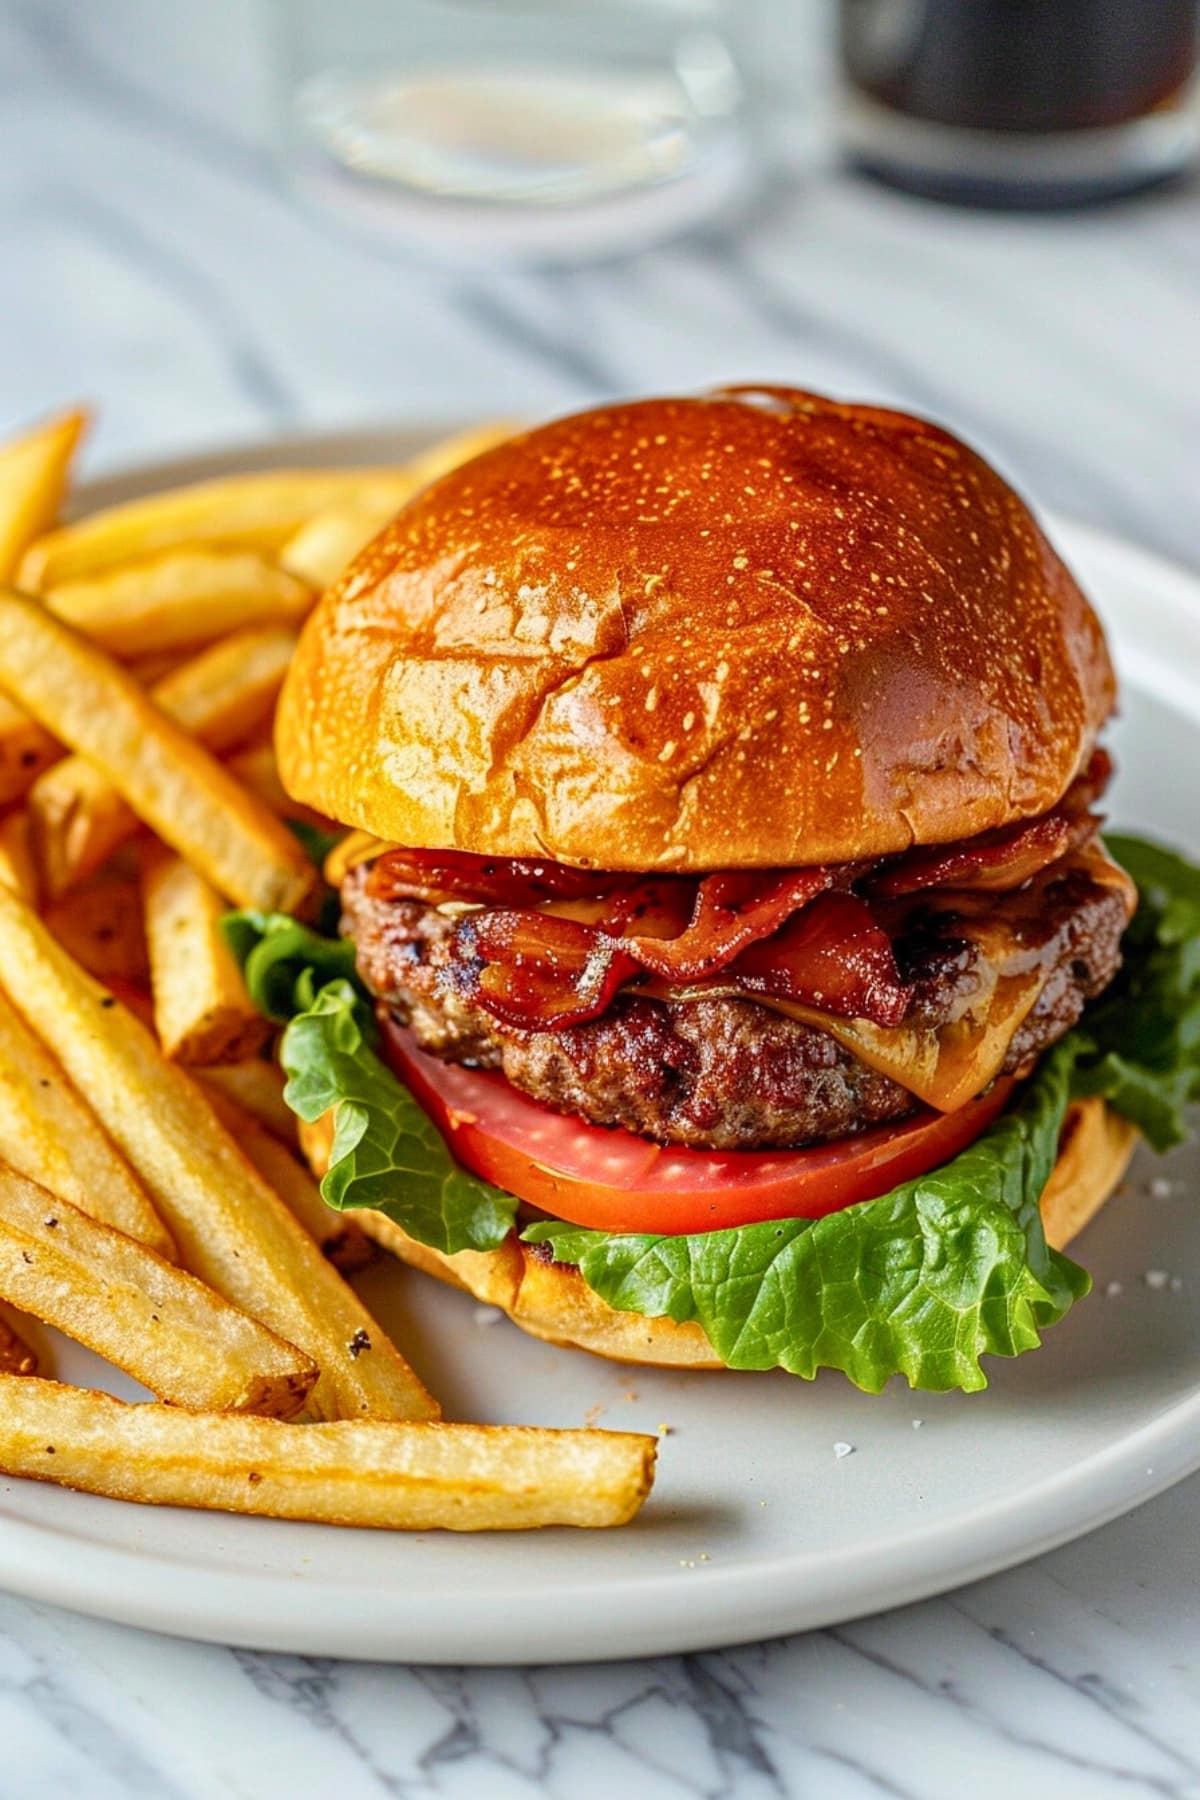 Burger with tomato, lettuce, cheese, bacon and thick beef patty filling served with fries.